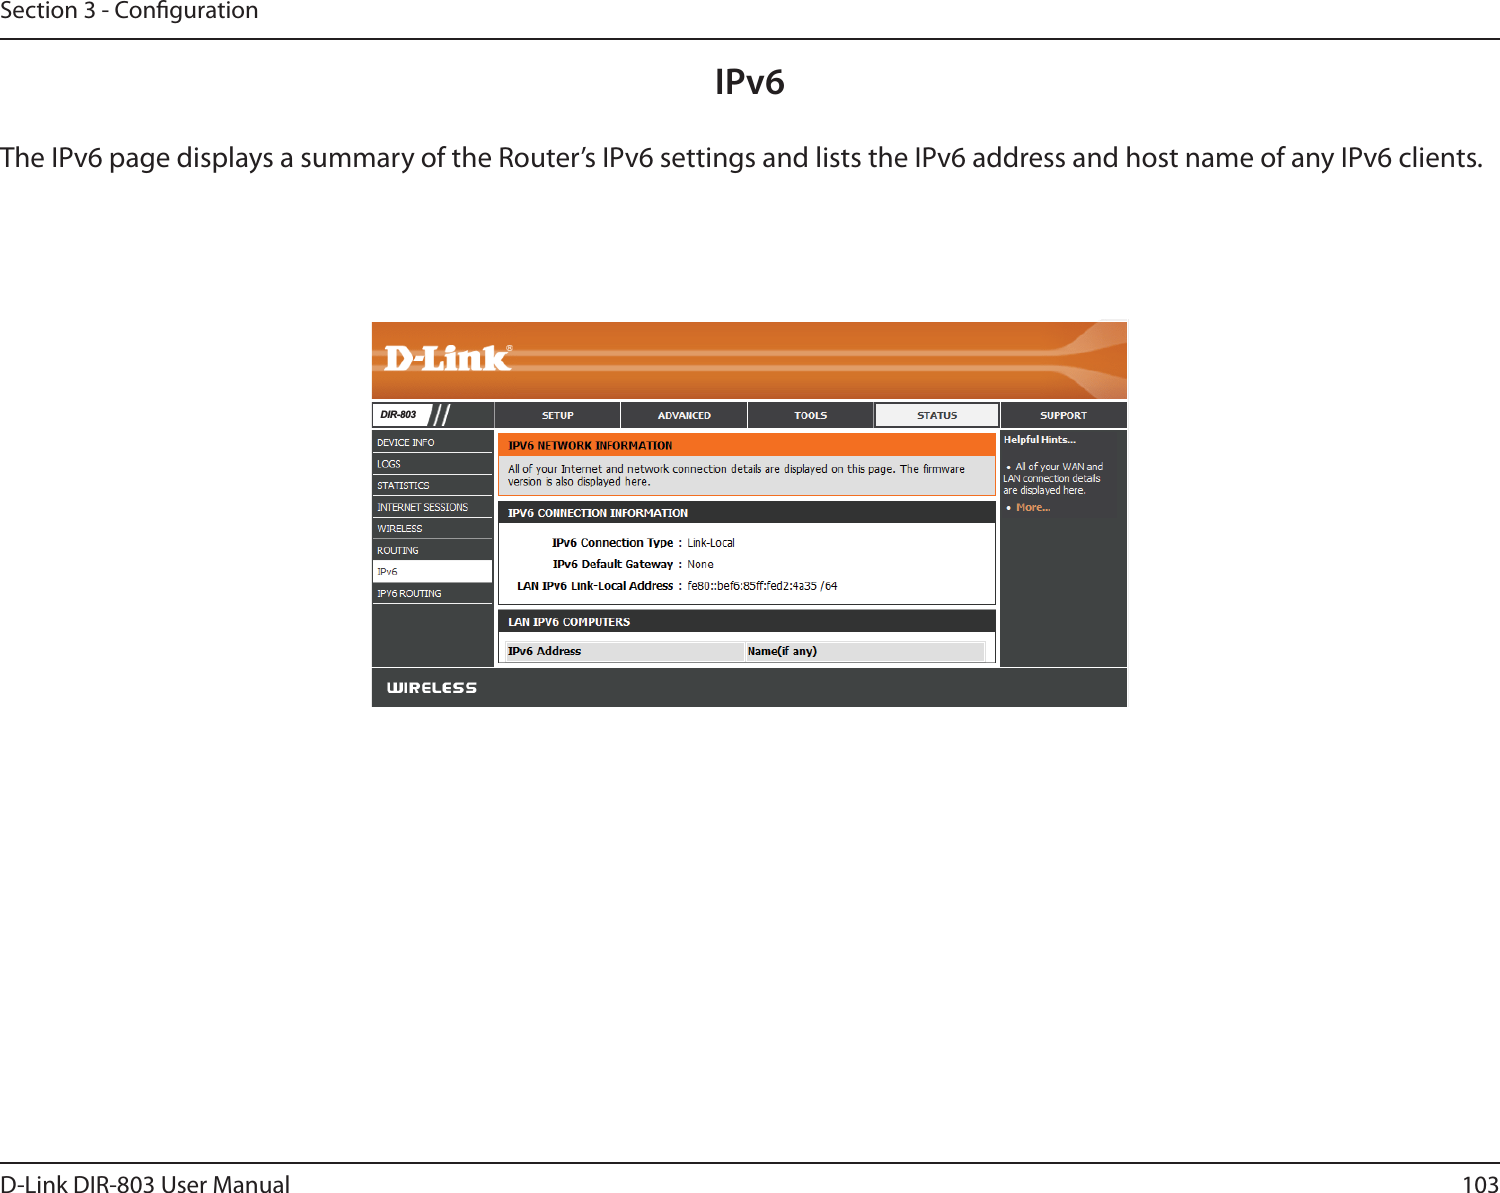 103D-Link DIR-803 User ManualSection 3 - CongurationIPv6The IPv6 page displays a summary of the Router’s IPv6 settings and lists the IPv6 address and host name of any IPv6 clients. &apos;,5